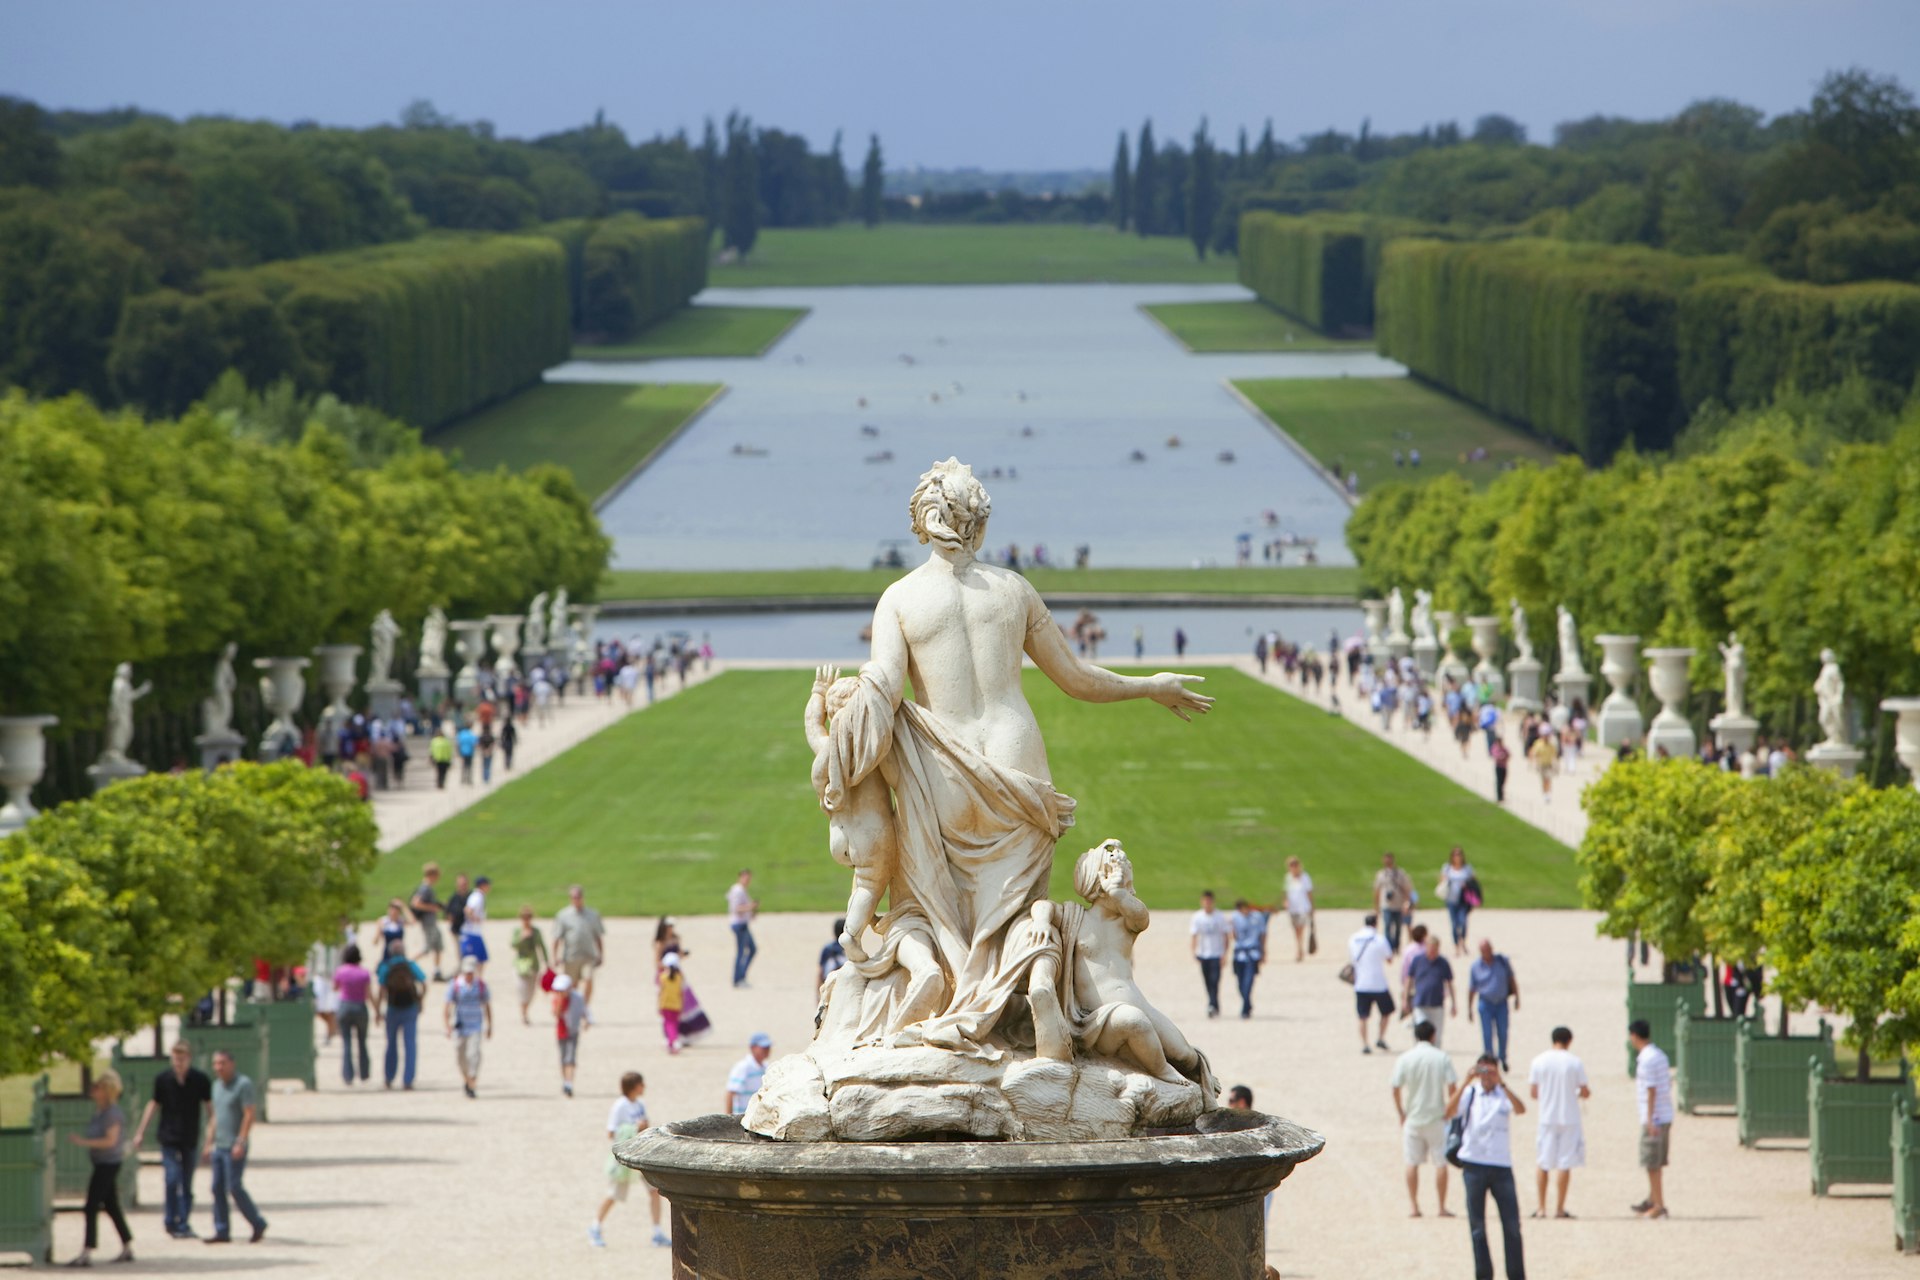 Visitors admiring the gardens of Versailles palace in Paris